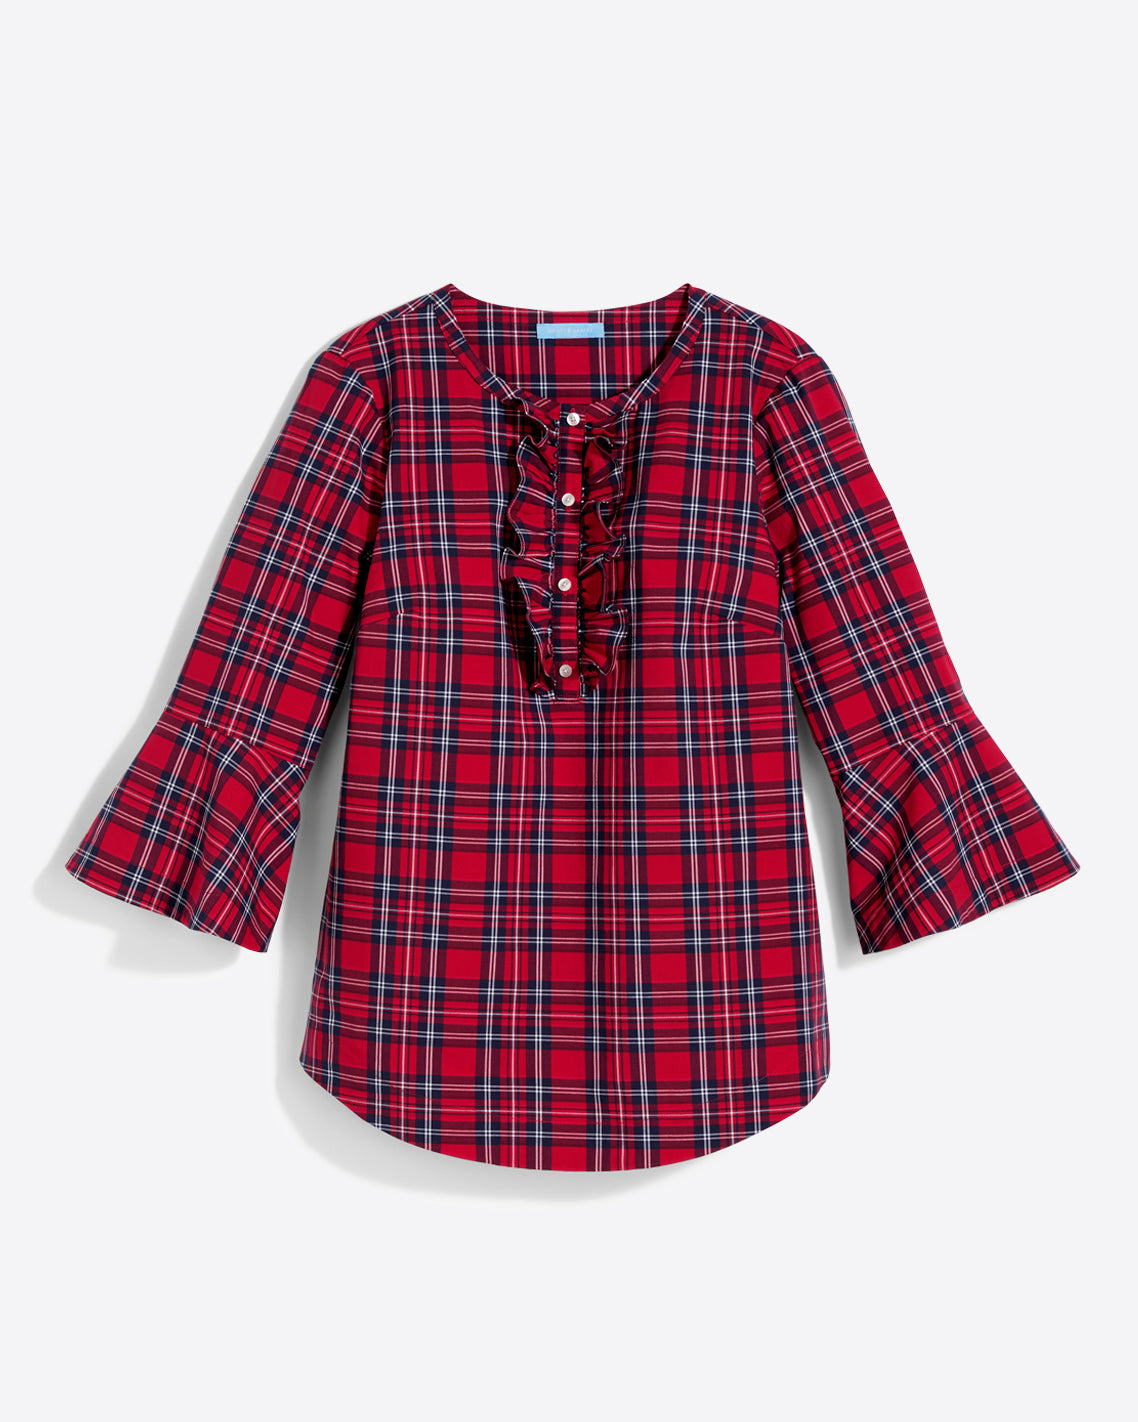 Ruffle Placket Tunic in Angie Plaid